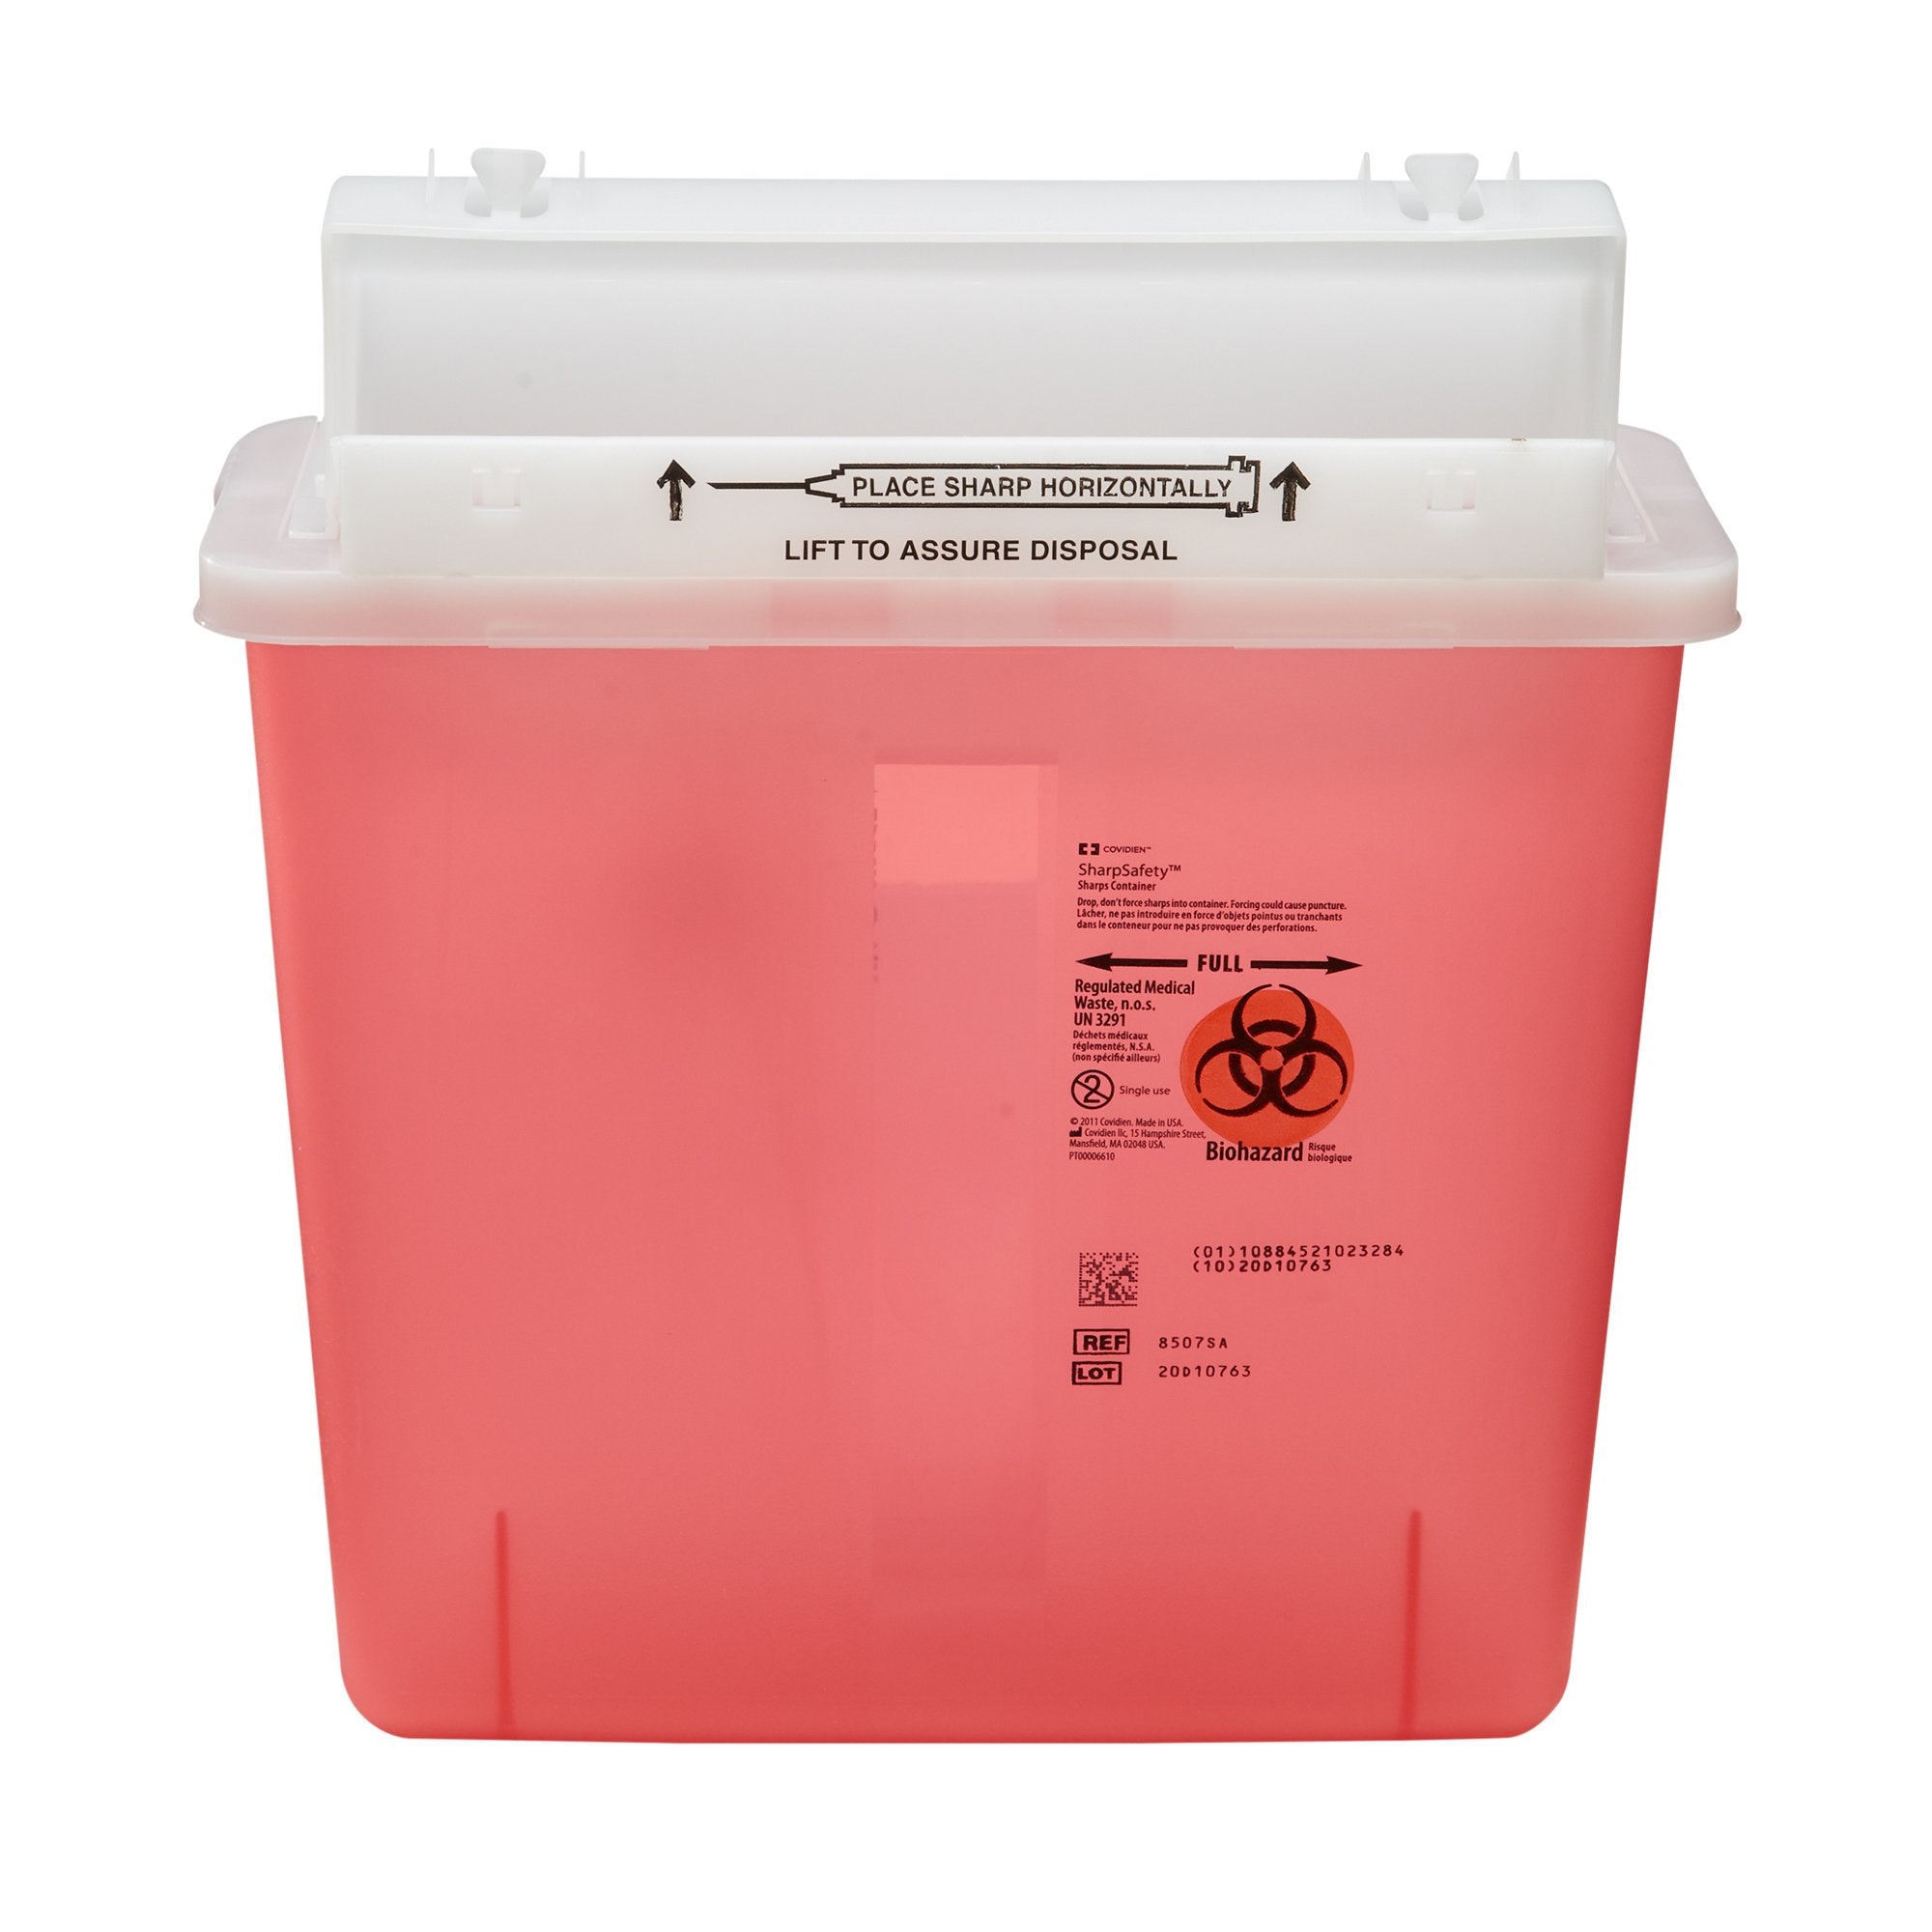 Sharps Container SharpStar In-Room Translucent Red Base 12-1/2 H X 5-1/2 D X 10-3/4 W Inch Horizontal Entry 1.25 Gallon